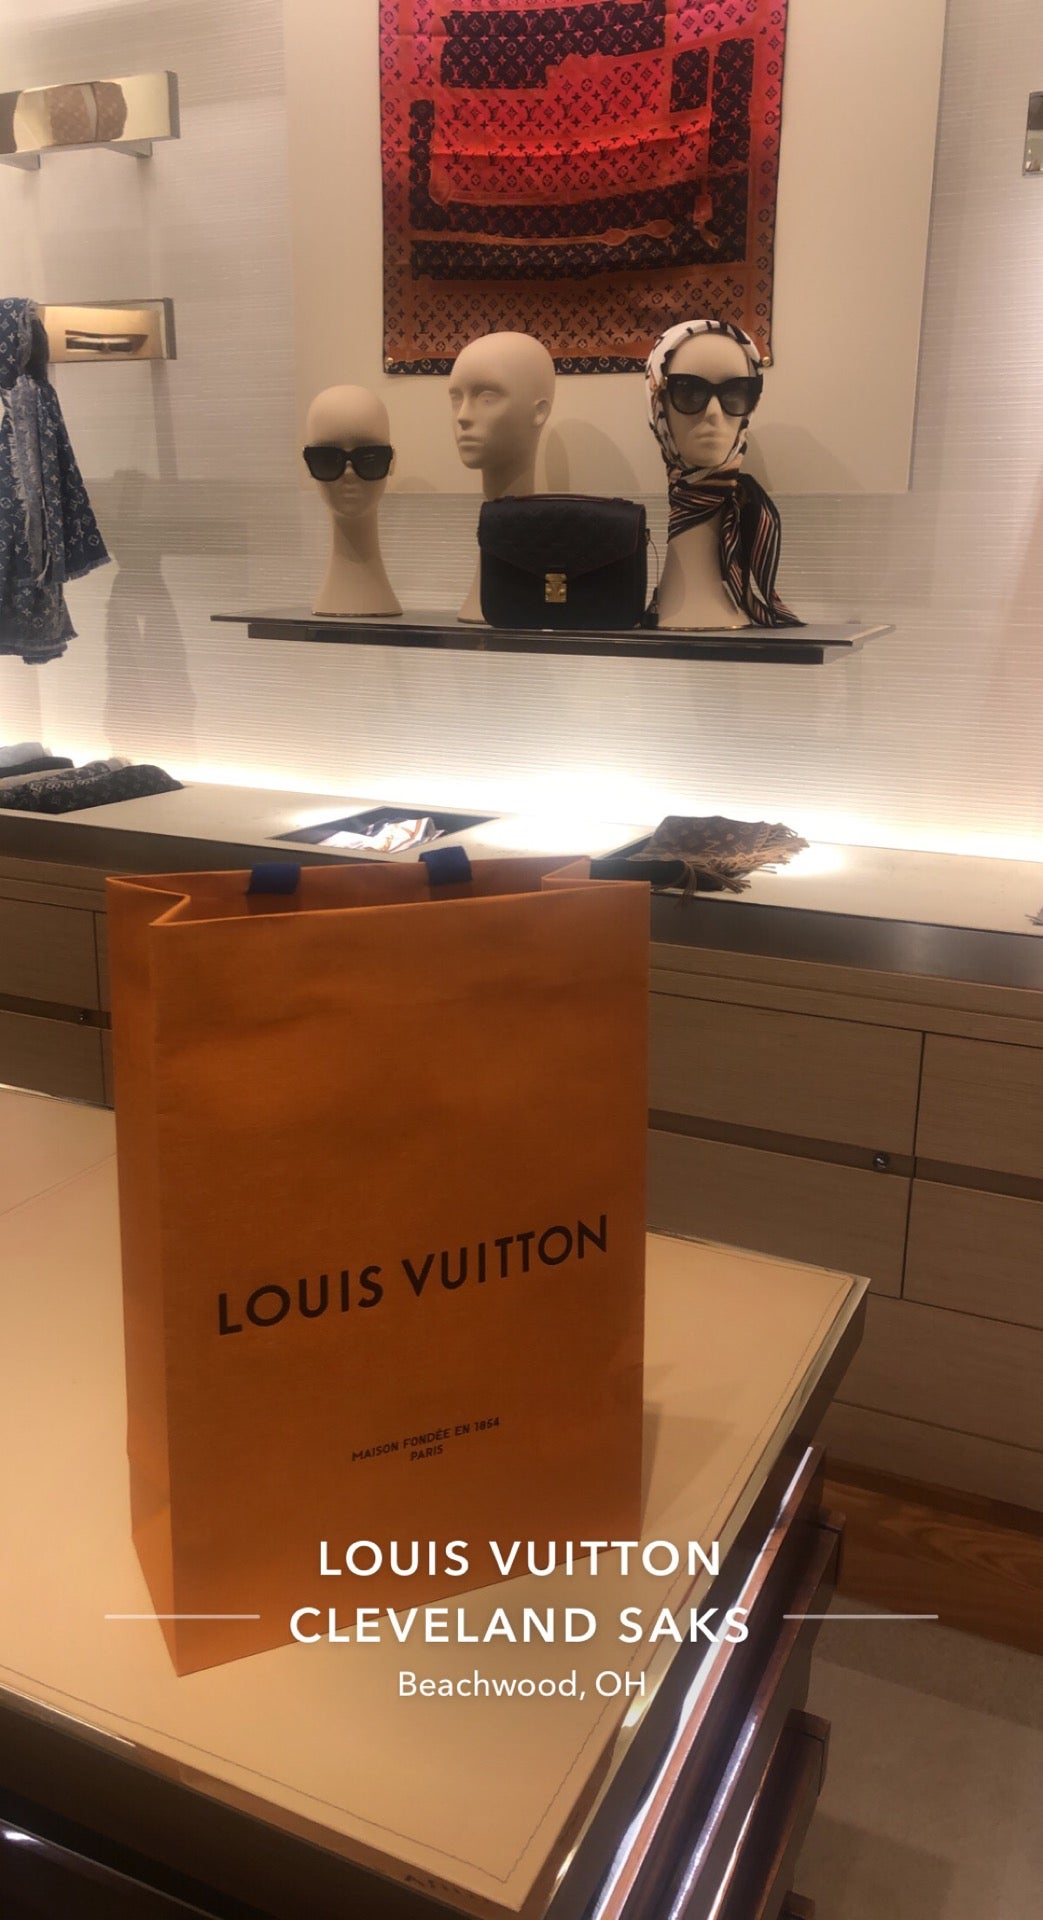 Louis Vuitton Locations In Indurstrial Valley, Cleveland, Oh